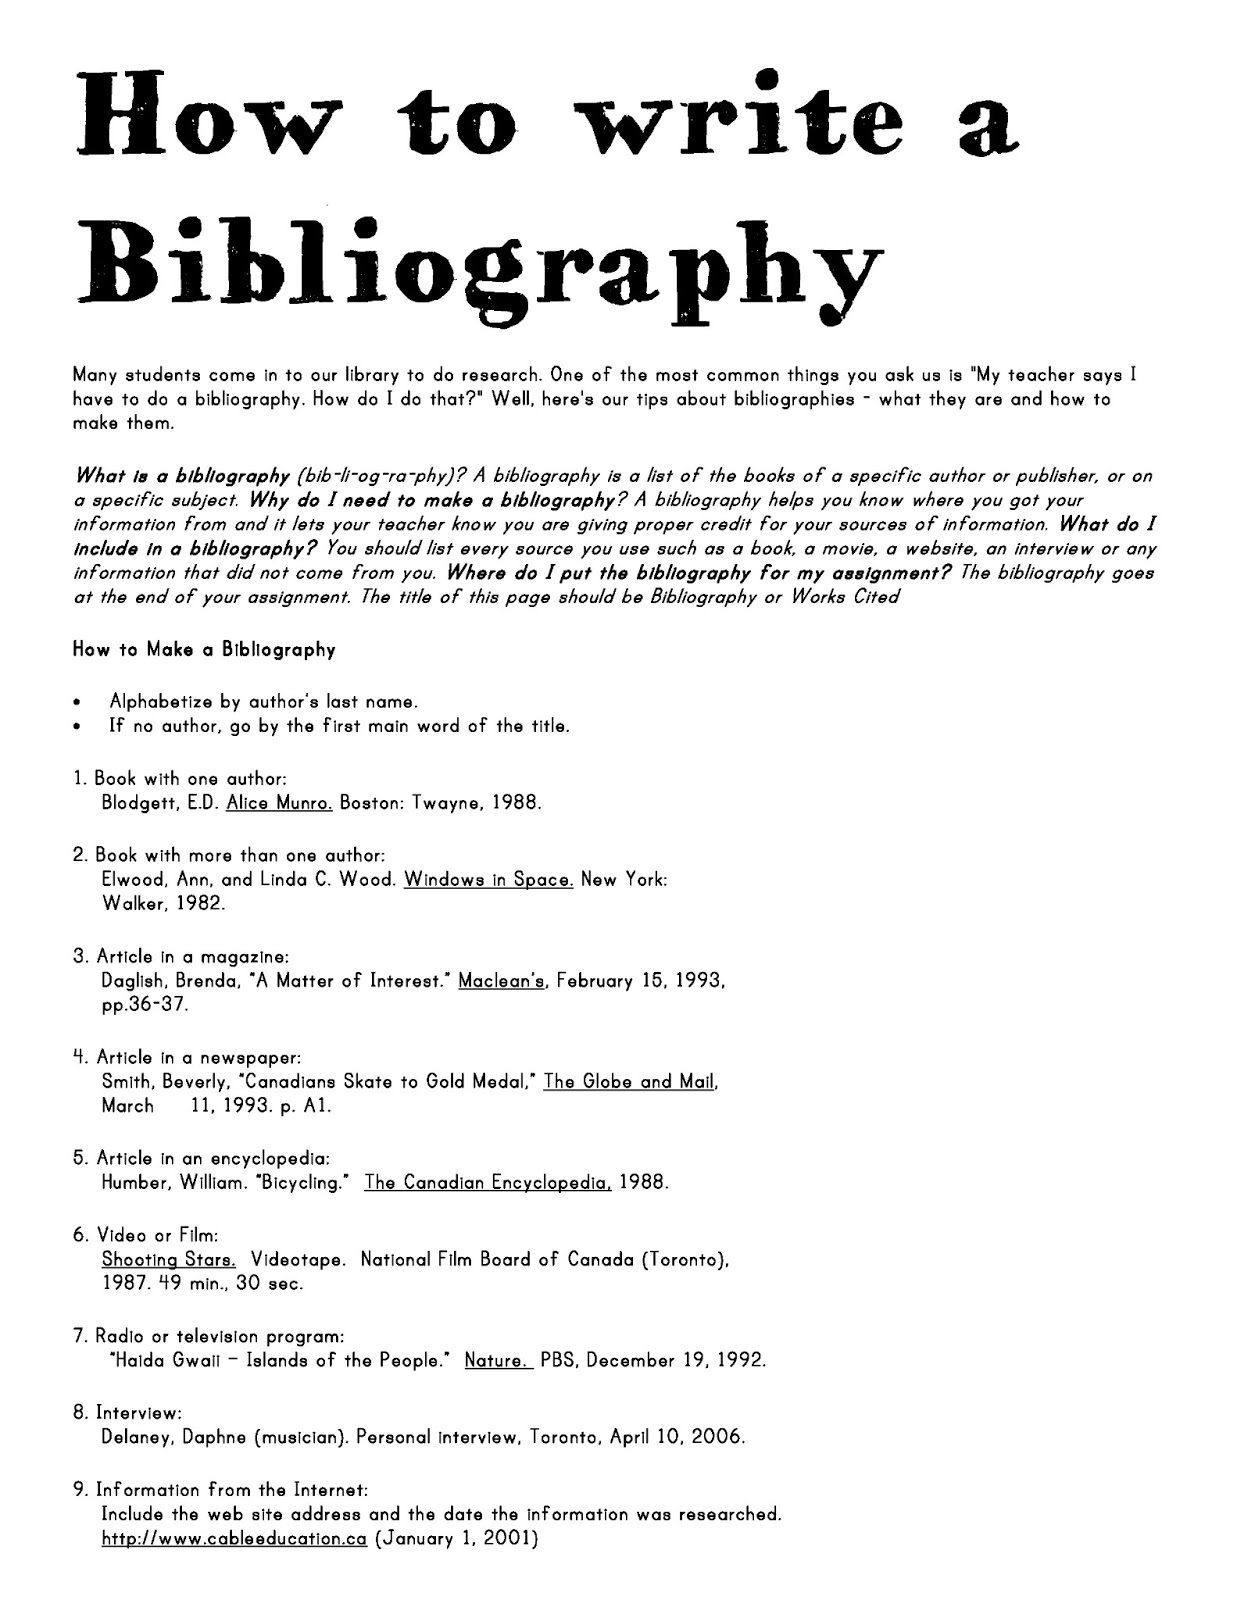 A bibliography format